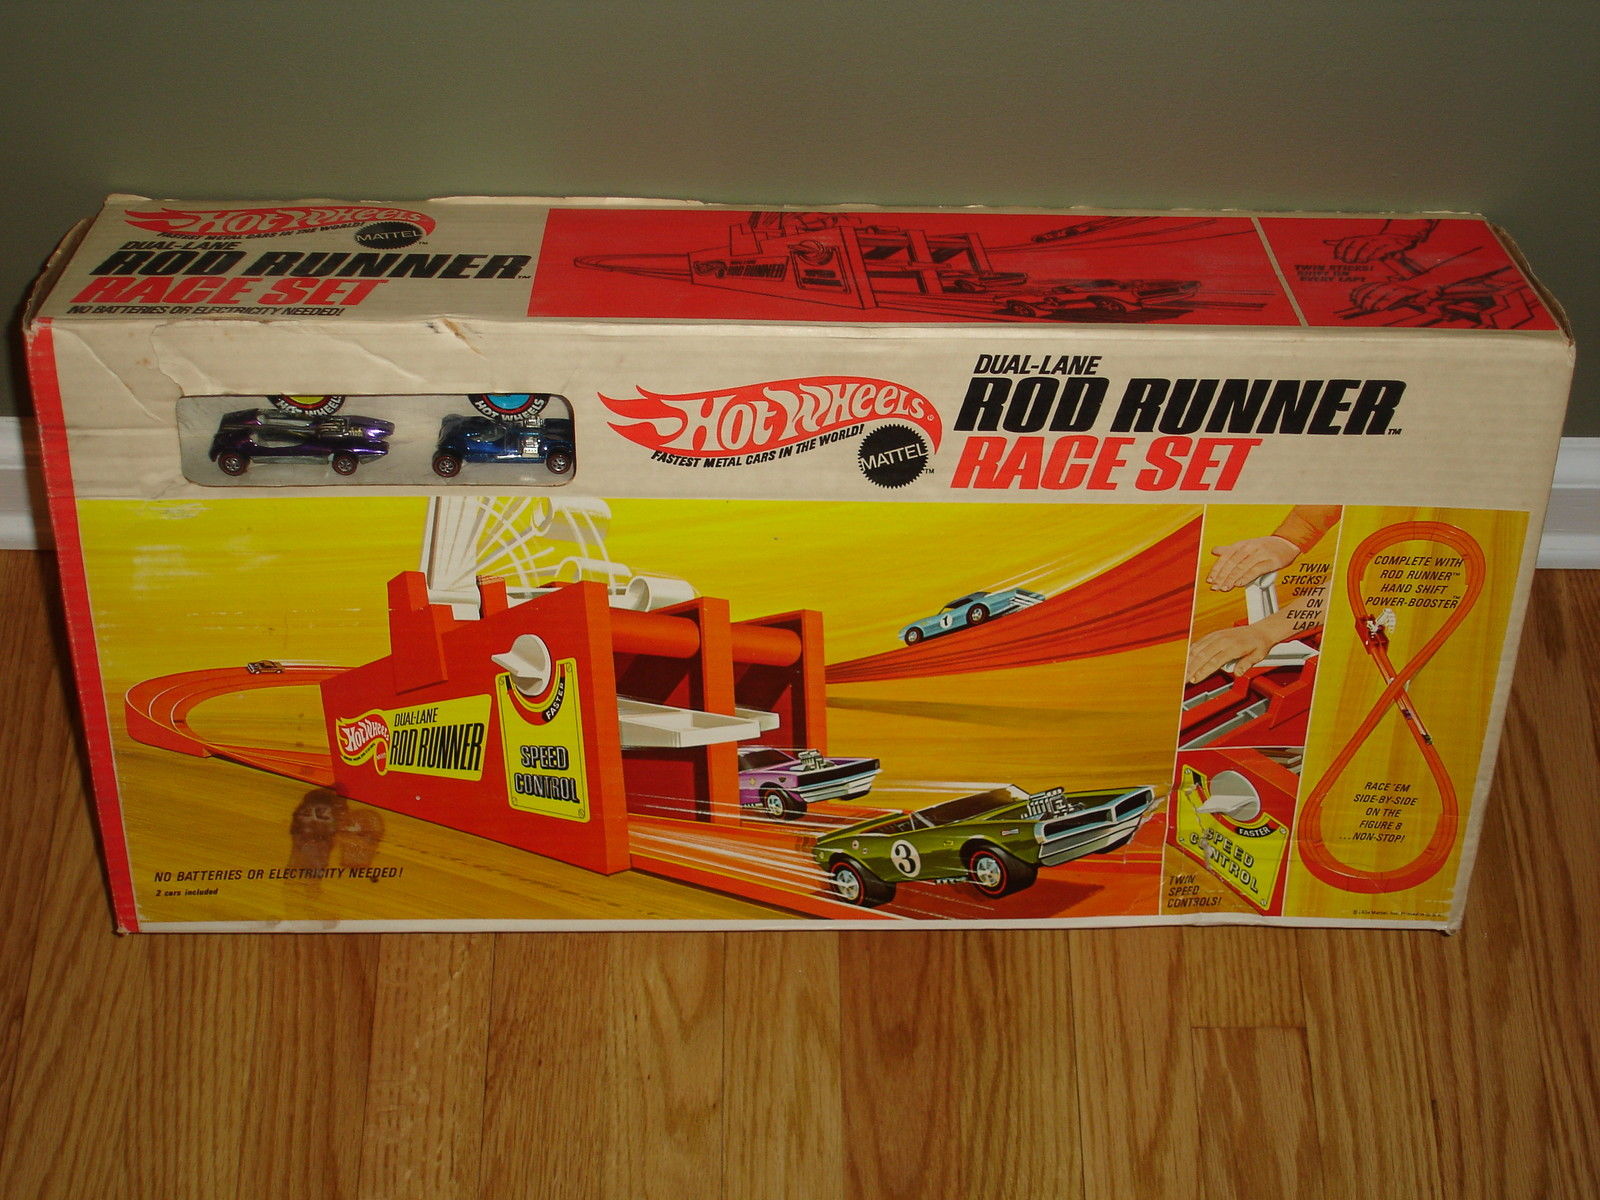 Rod Runner AND Dual Lane Rod Runner stickers decals Hot Wheels!